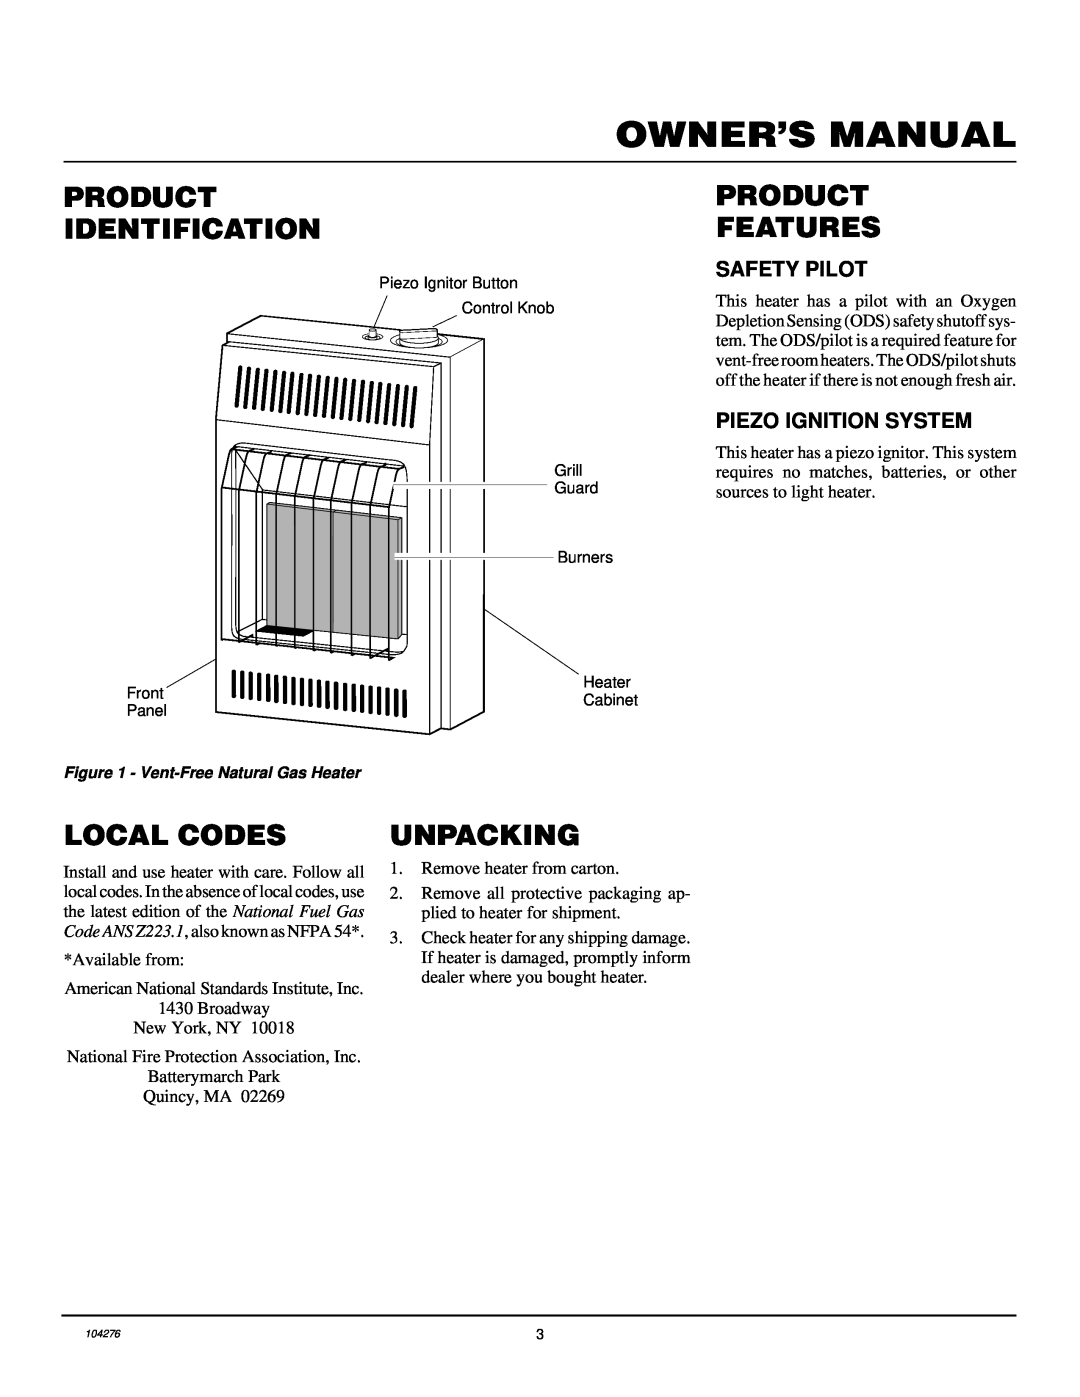 Desa CGN10RLA installation manual Product Identification, Product Features, Local Codes, Unpacking 